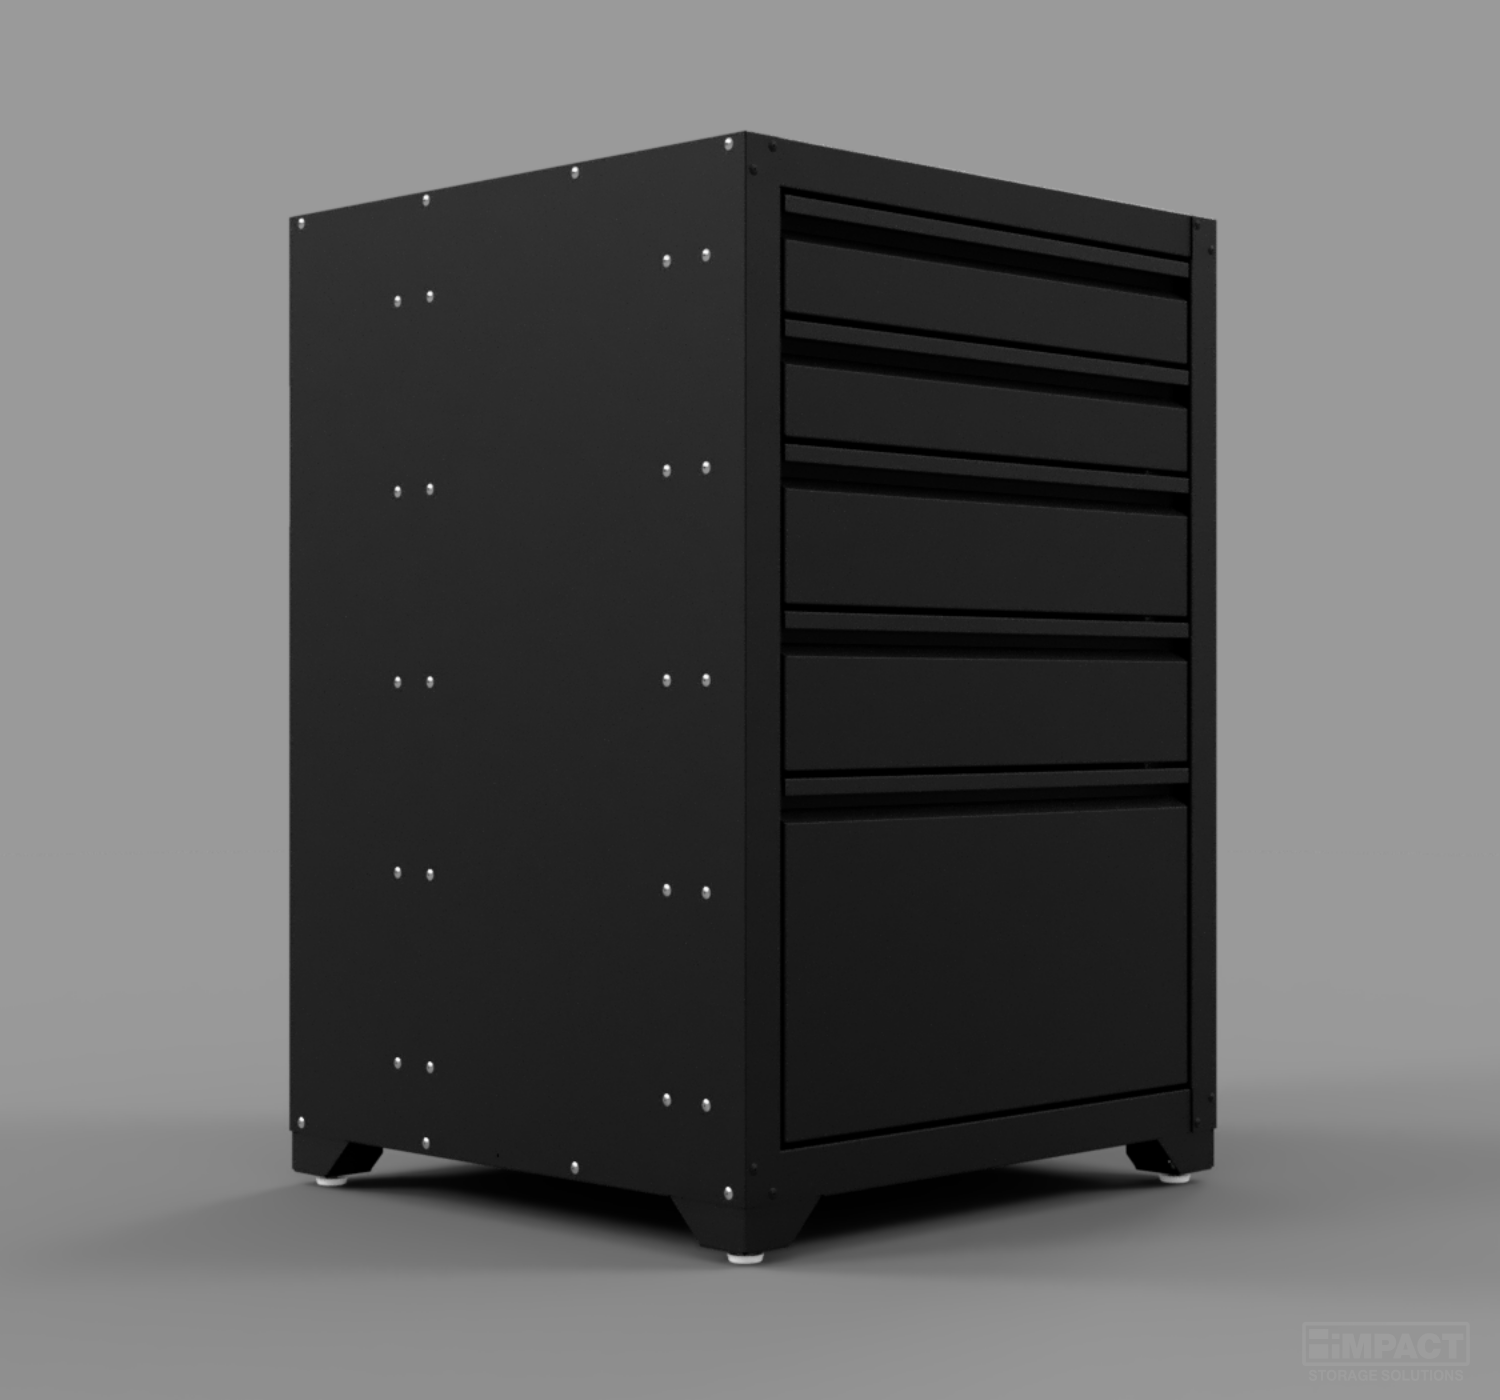 Side view of five drawer base cabinet